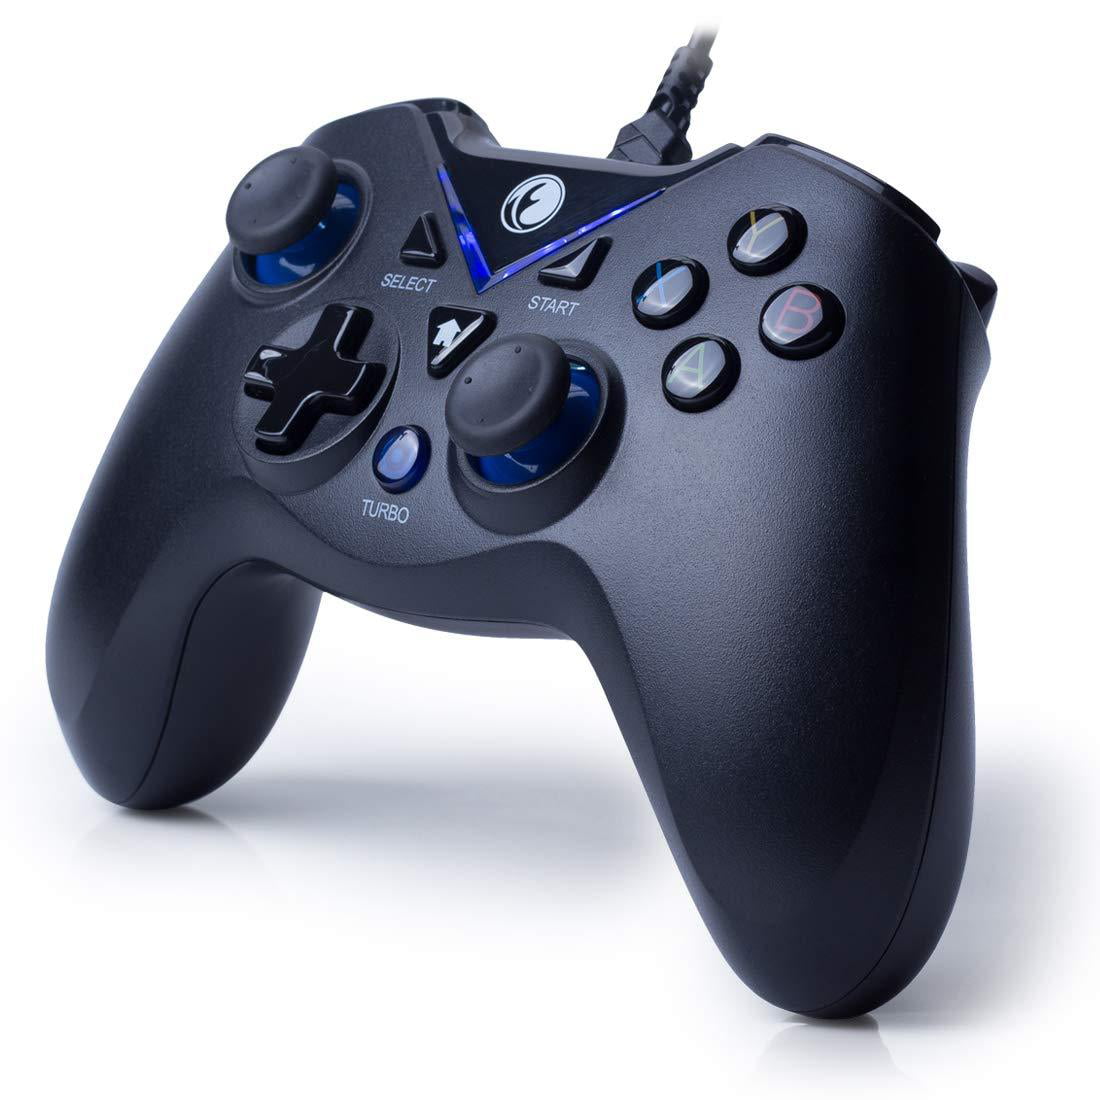 IFYOO ZD Vone Wired Gaming Controller USB Gamepad Joystick for PC